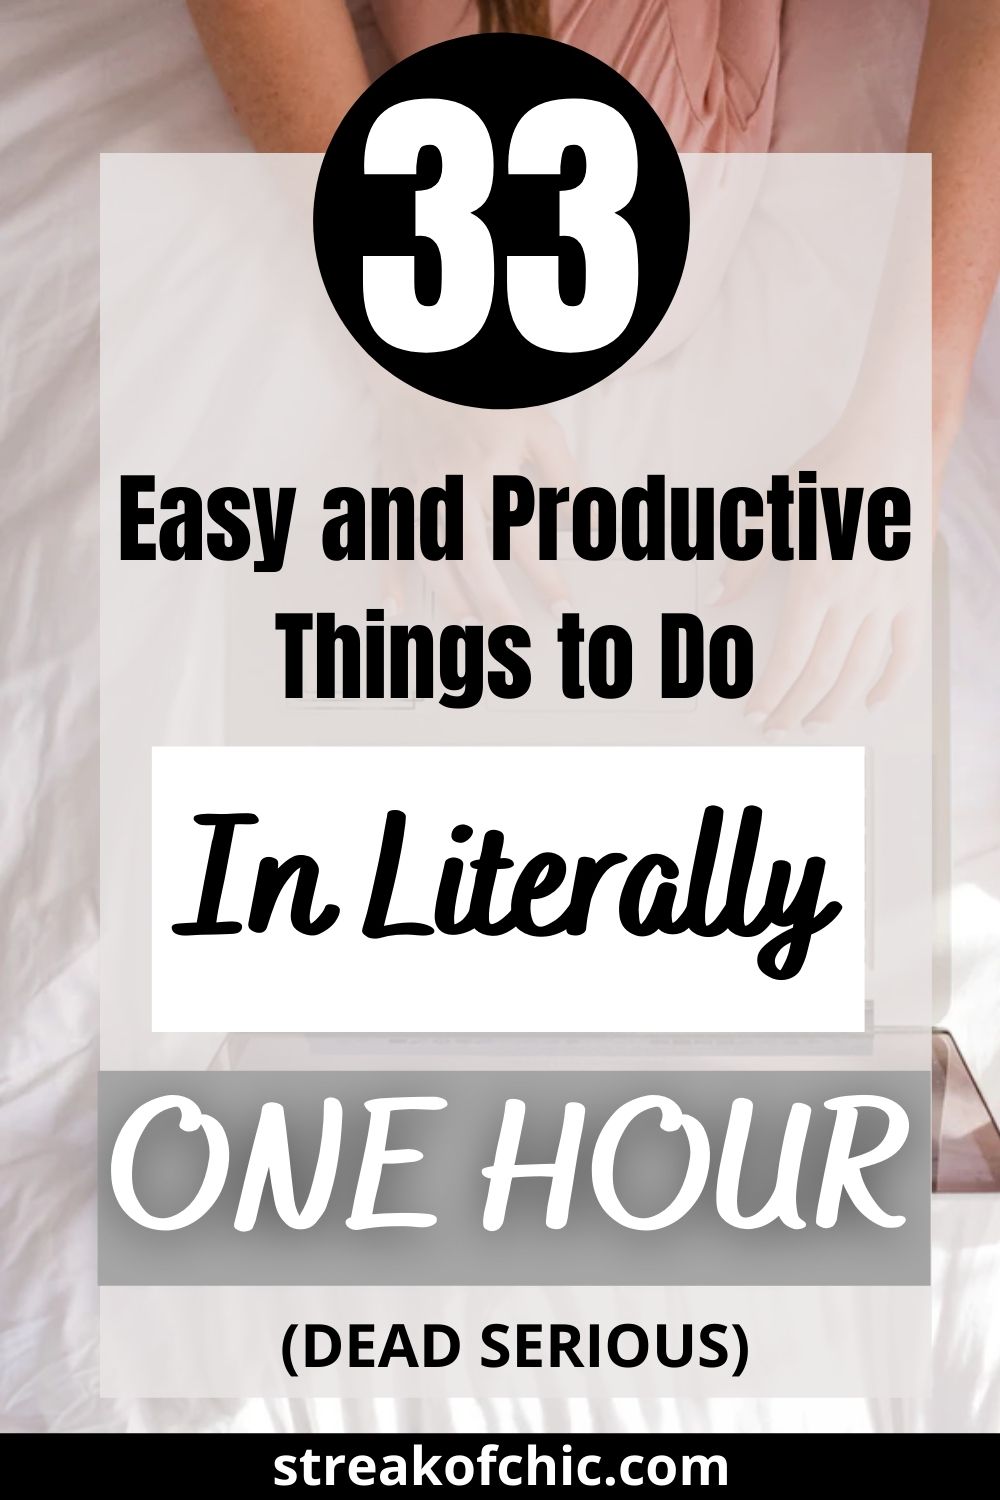 33 Productive Things to Do in Only One Hour